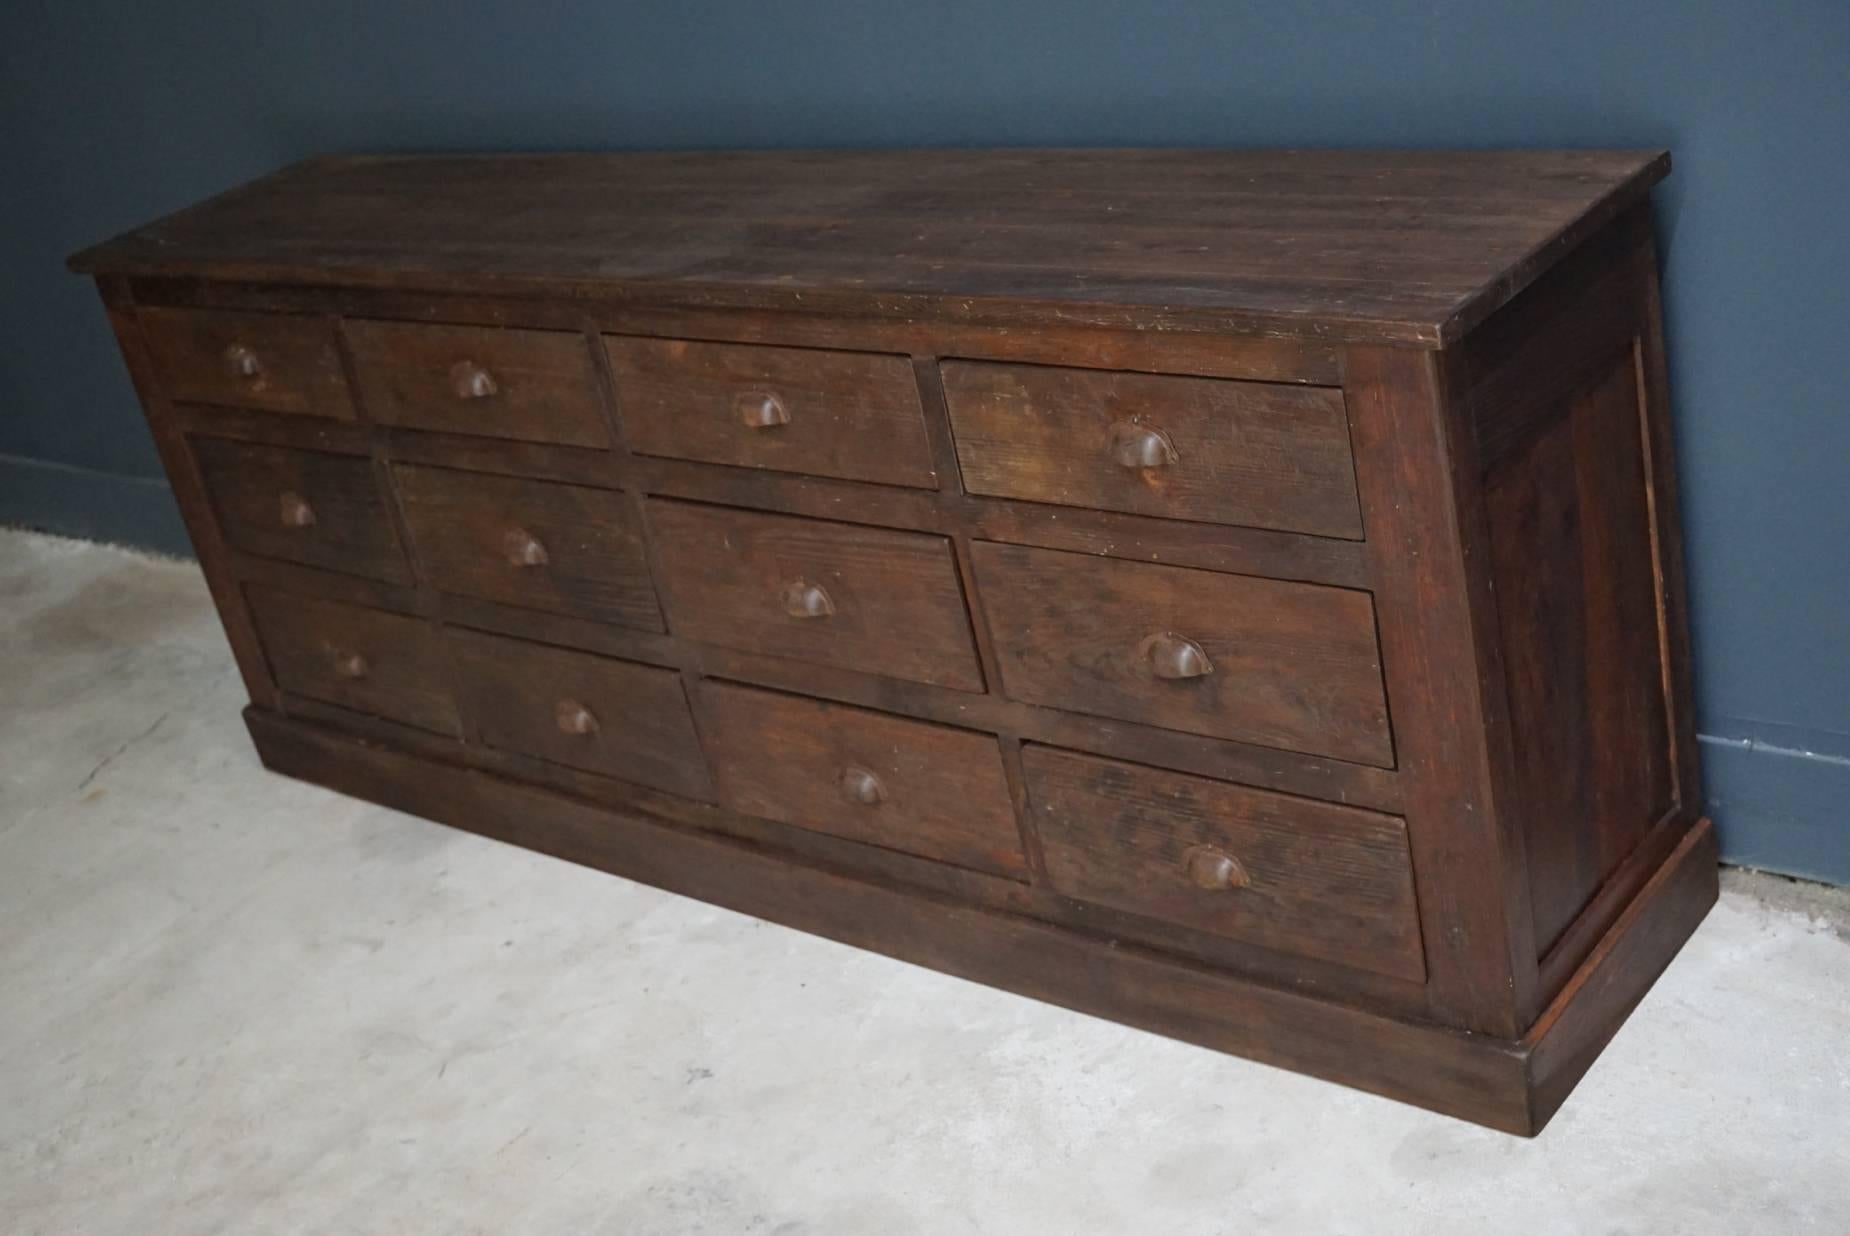 This apothecary bank of drawers was designed and made circa 1950s in France. The piece is made from pine and features drawers with cup handles.